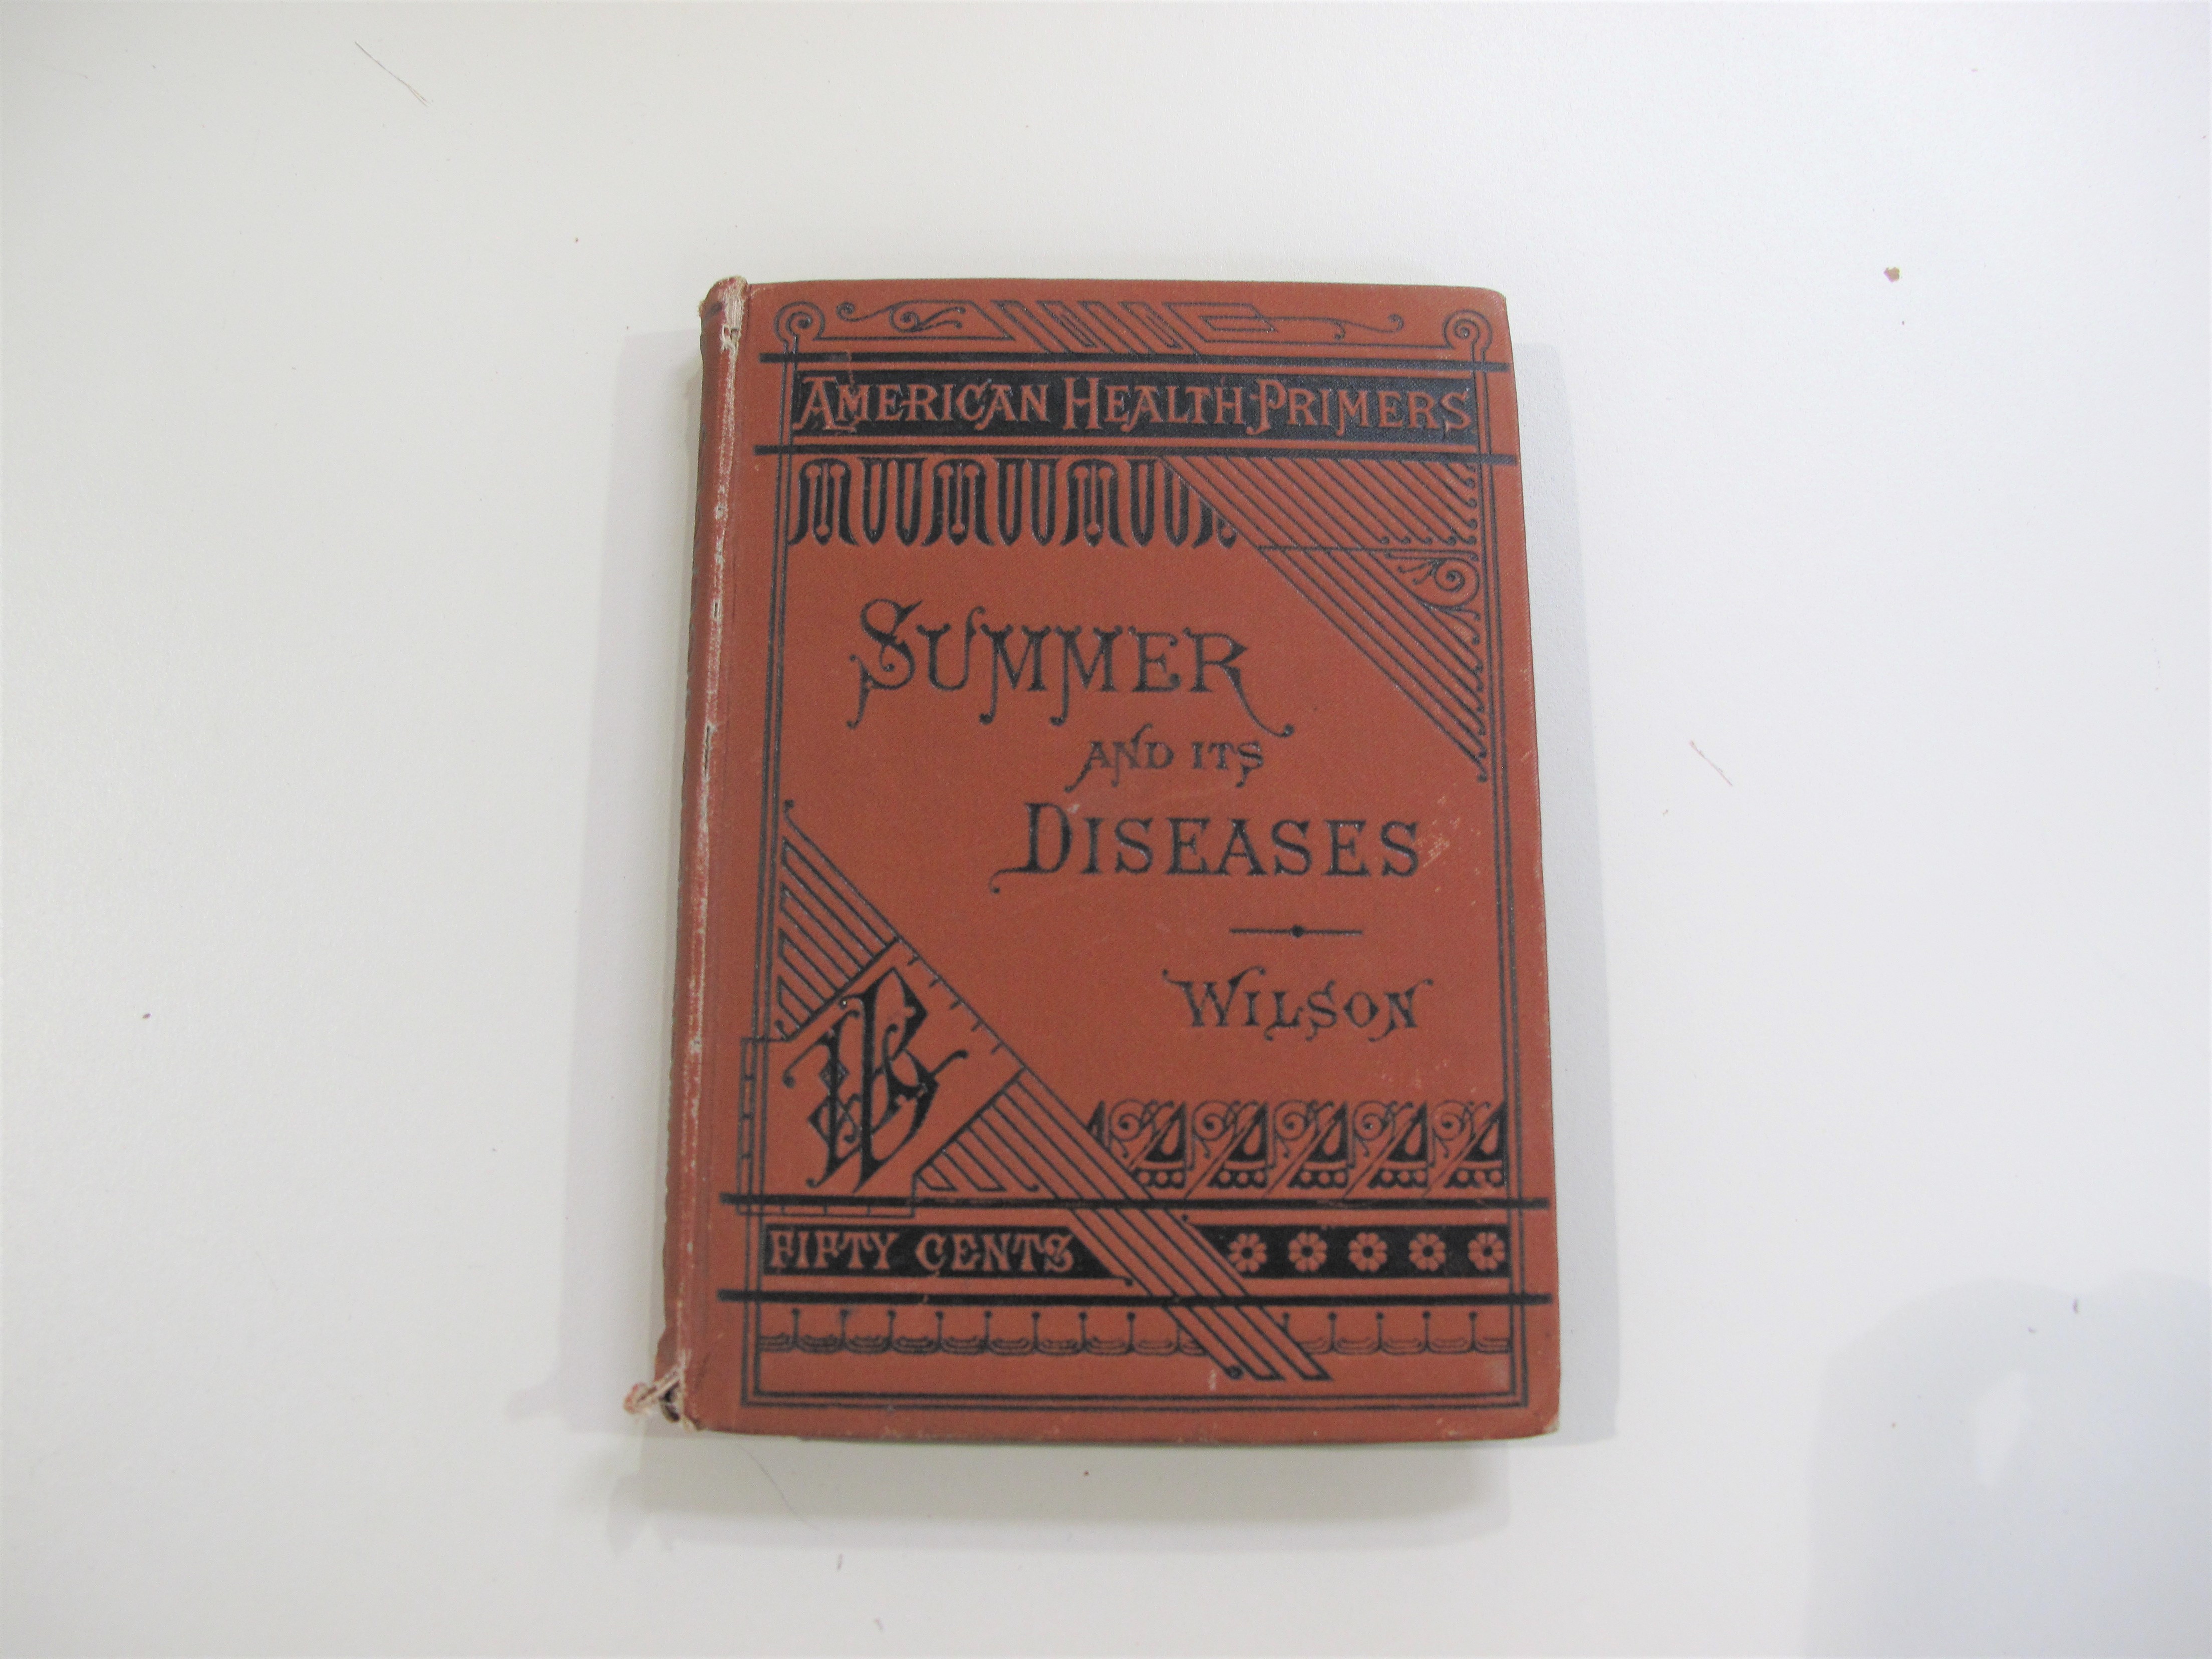 Summer and its Diseases. By J. C. Wilson-1879. [Mading Collection, McGovern Historical Collection, Texas Medical Center Library]